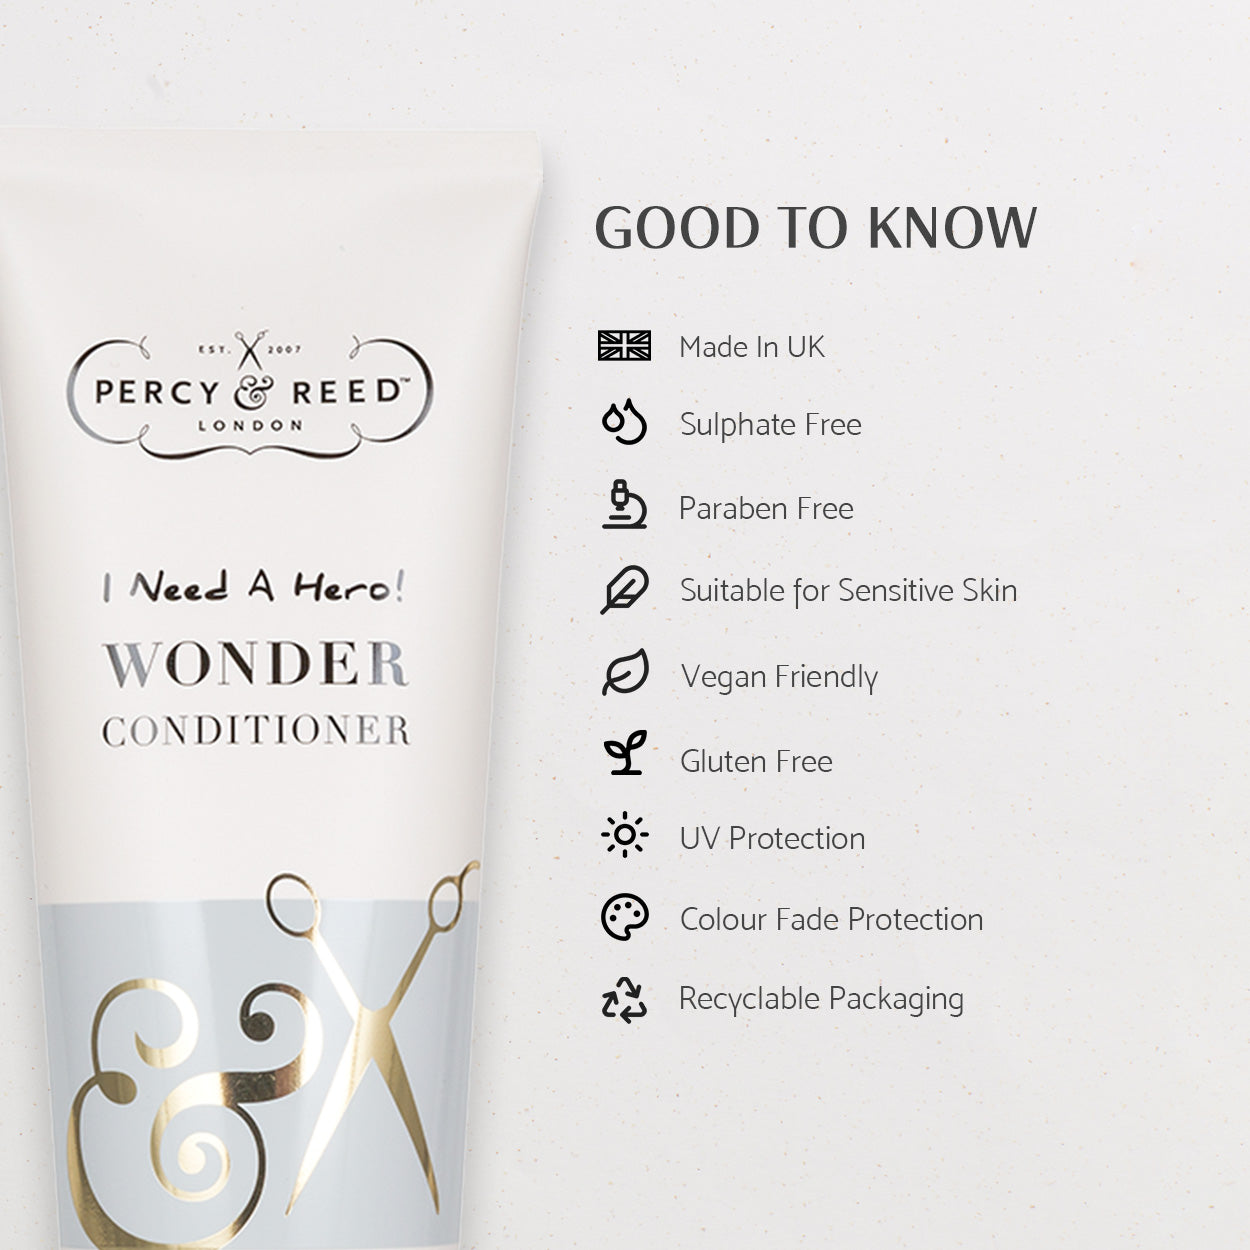 Percy & Reed I Need A Hero! Wonder Conditioner